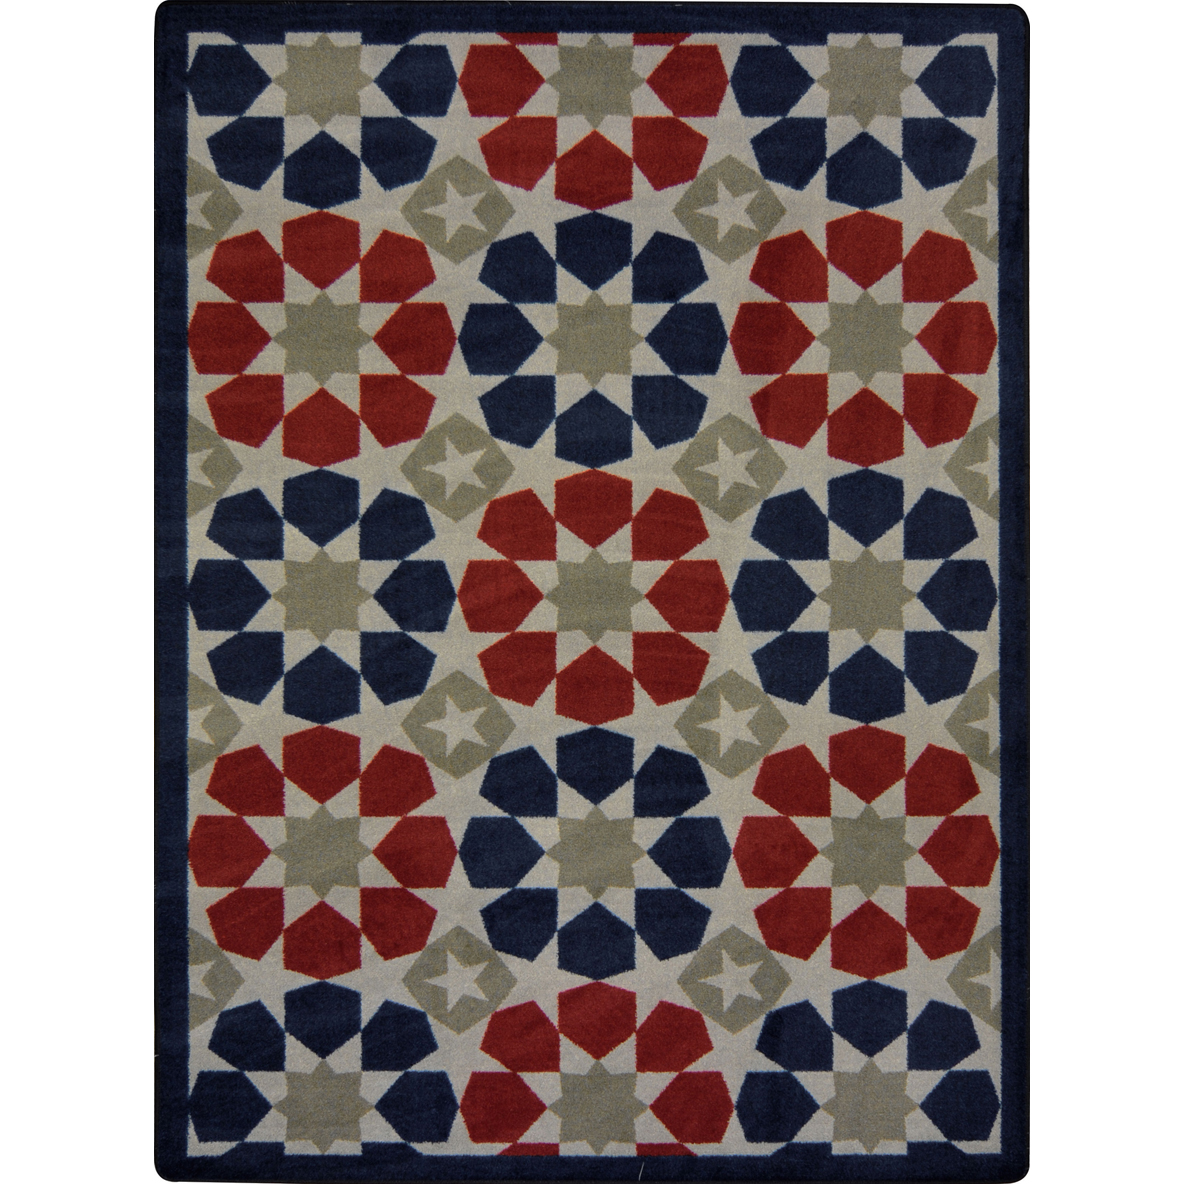 129-Inch by 158-Inch by 0.36-Inch Cactus Joy Carpets Kaleidoscope Canyon Ridge Whimsical Area Rugs 